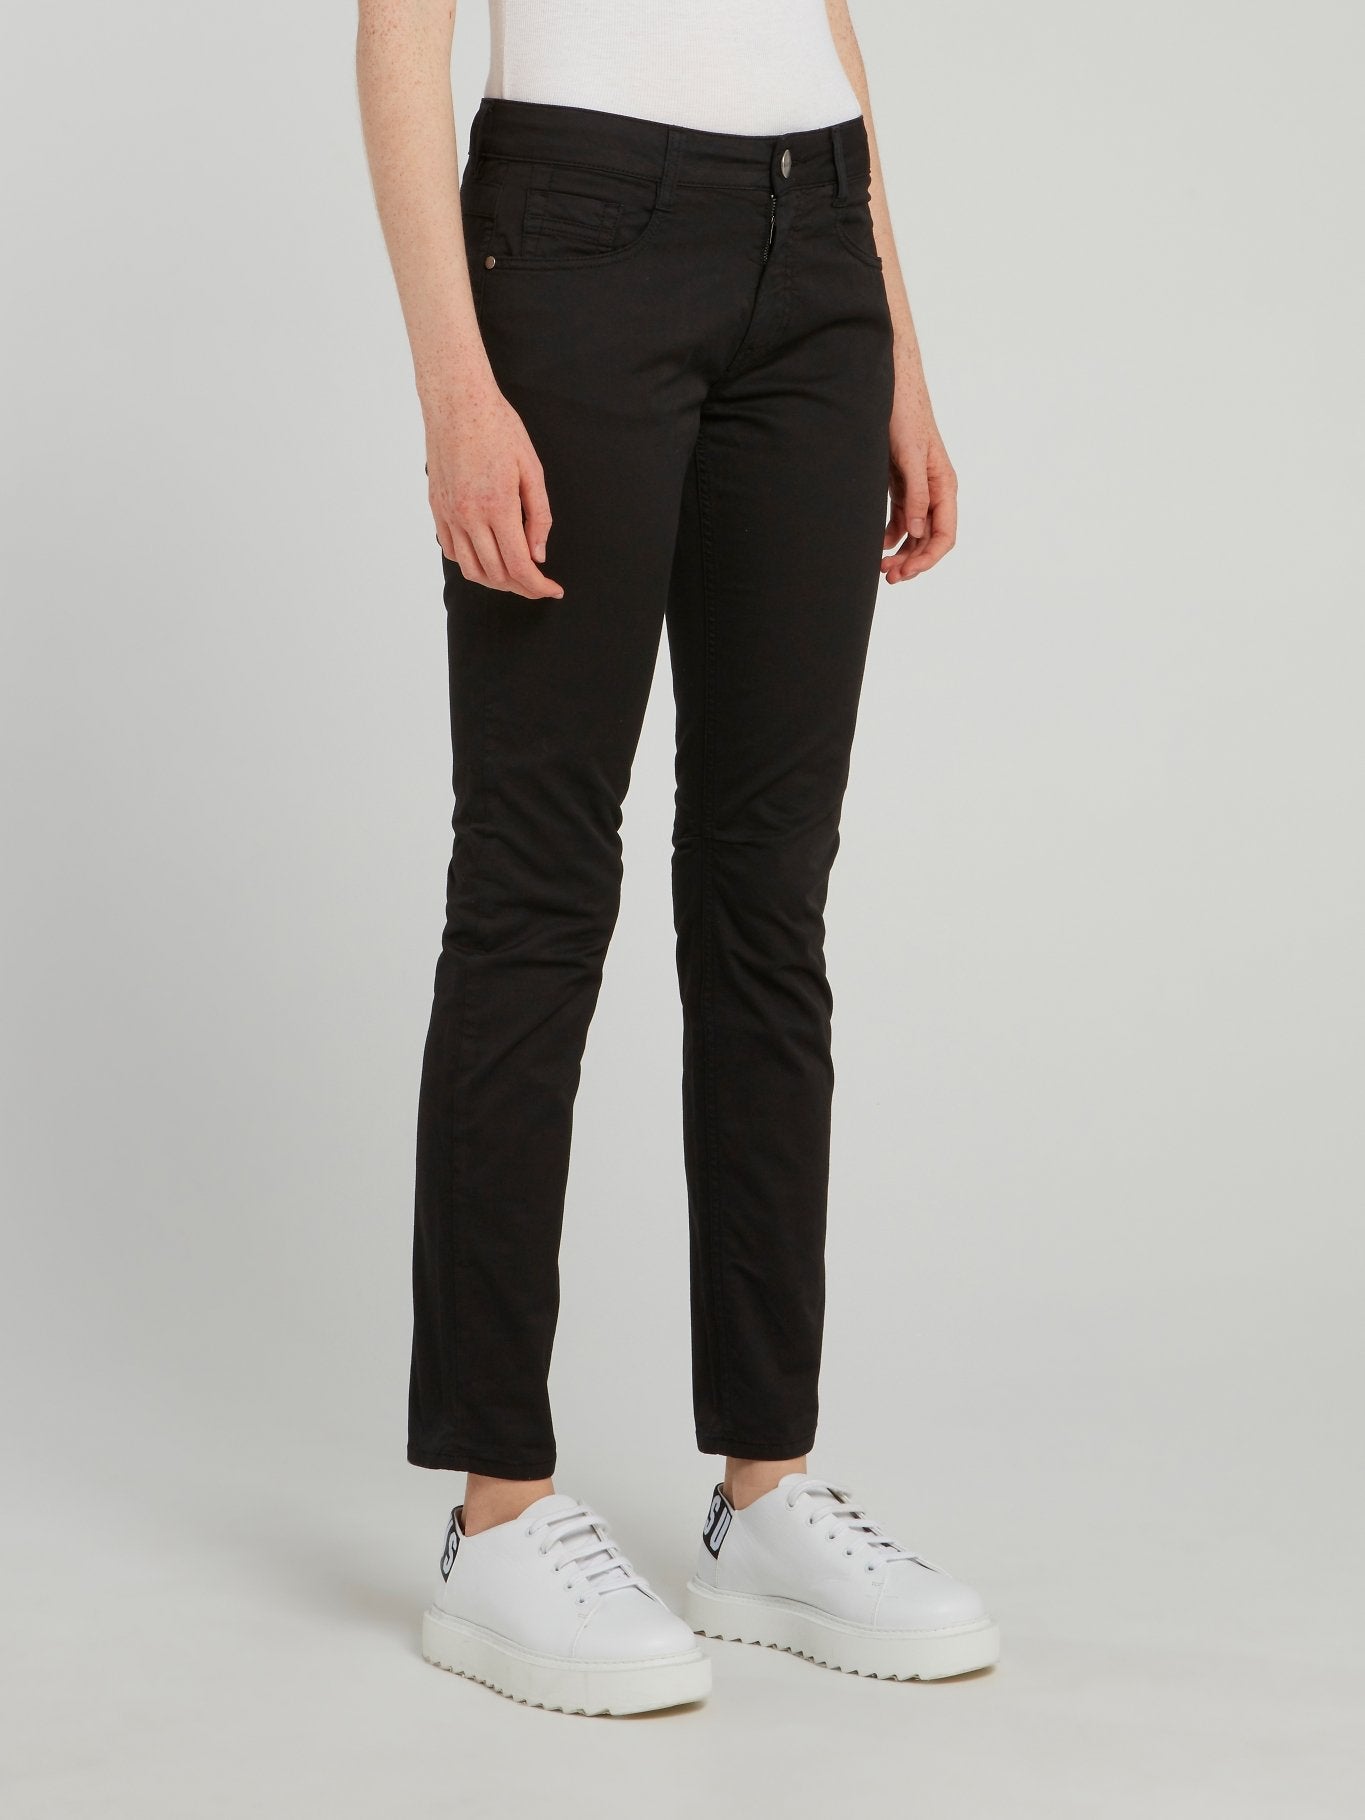 Black Skinny Cropped Trousers